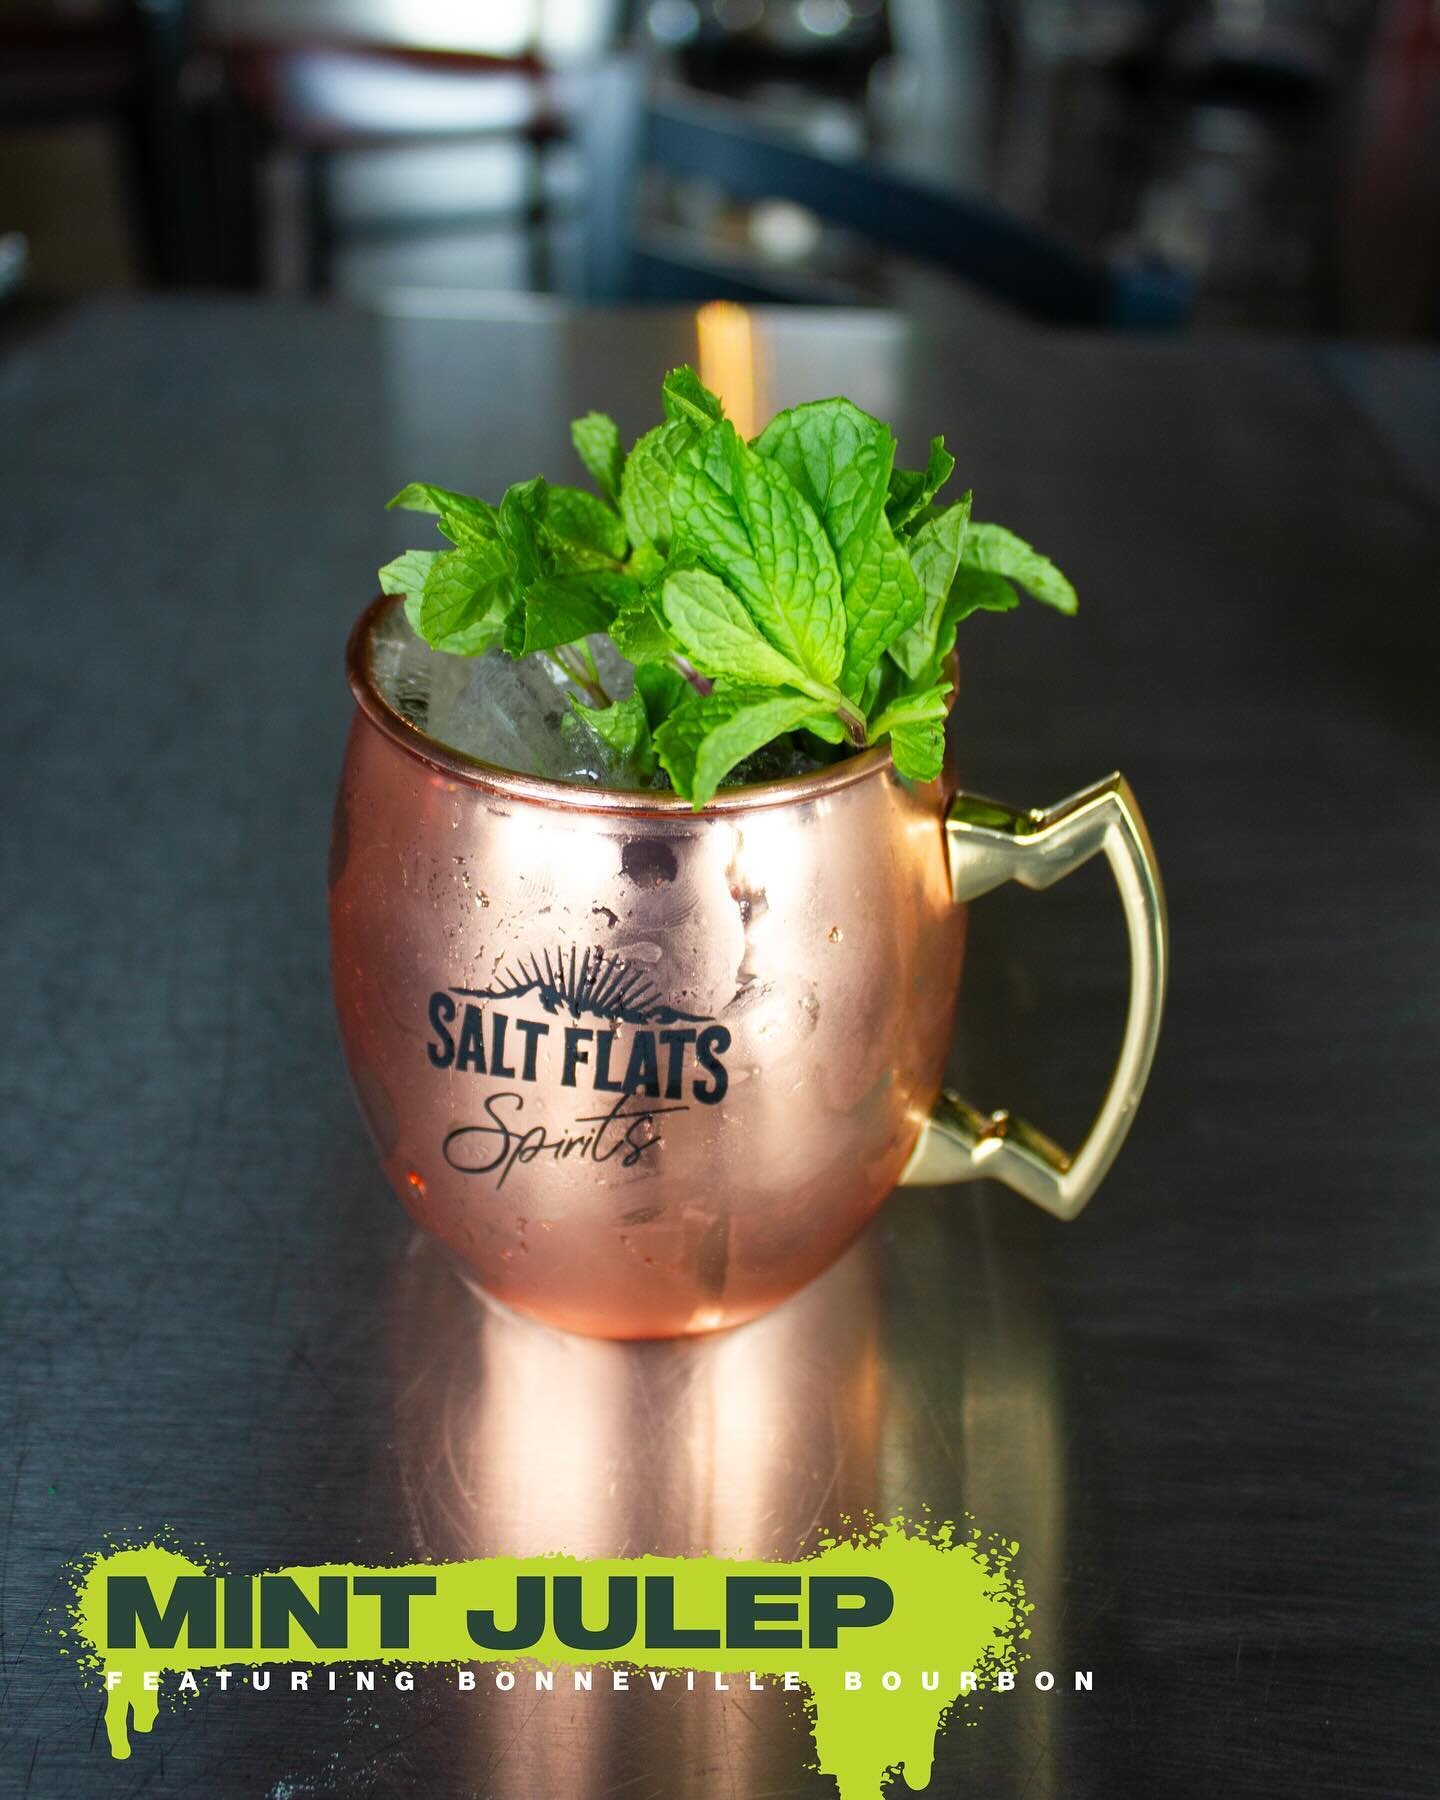 Looking for the perfect Spring cocktail? Try this super easy and refreshing Mint Julep featuring our  Bonneville Bourbon 🥃 A timeless classic crafted to perfection🍸✨
.
.
.
.
#saltflatsspirits #saltflatsdistillery #yum 
#saltflatsdistilling #drinksa